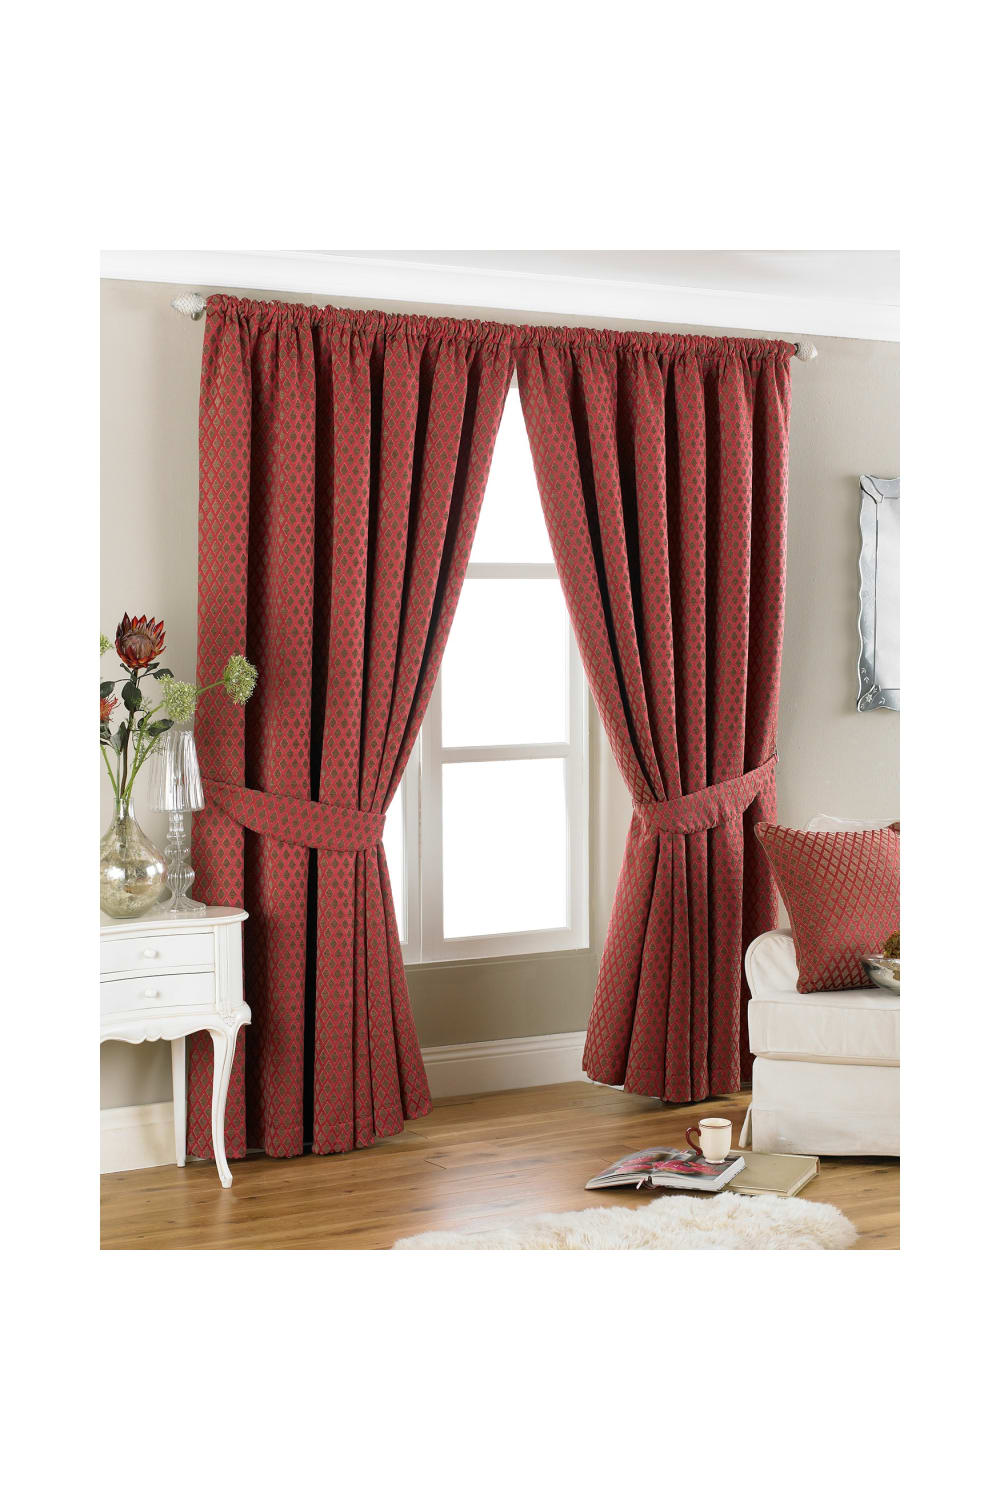 Riva Home Devere Pencil Pleat Curtains (Burgundy) (90 x 90 inch)